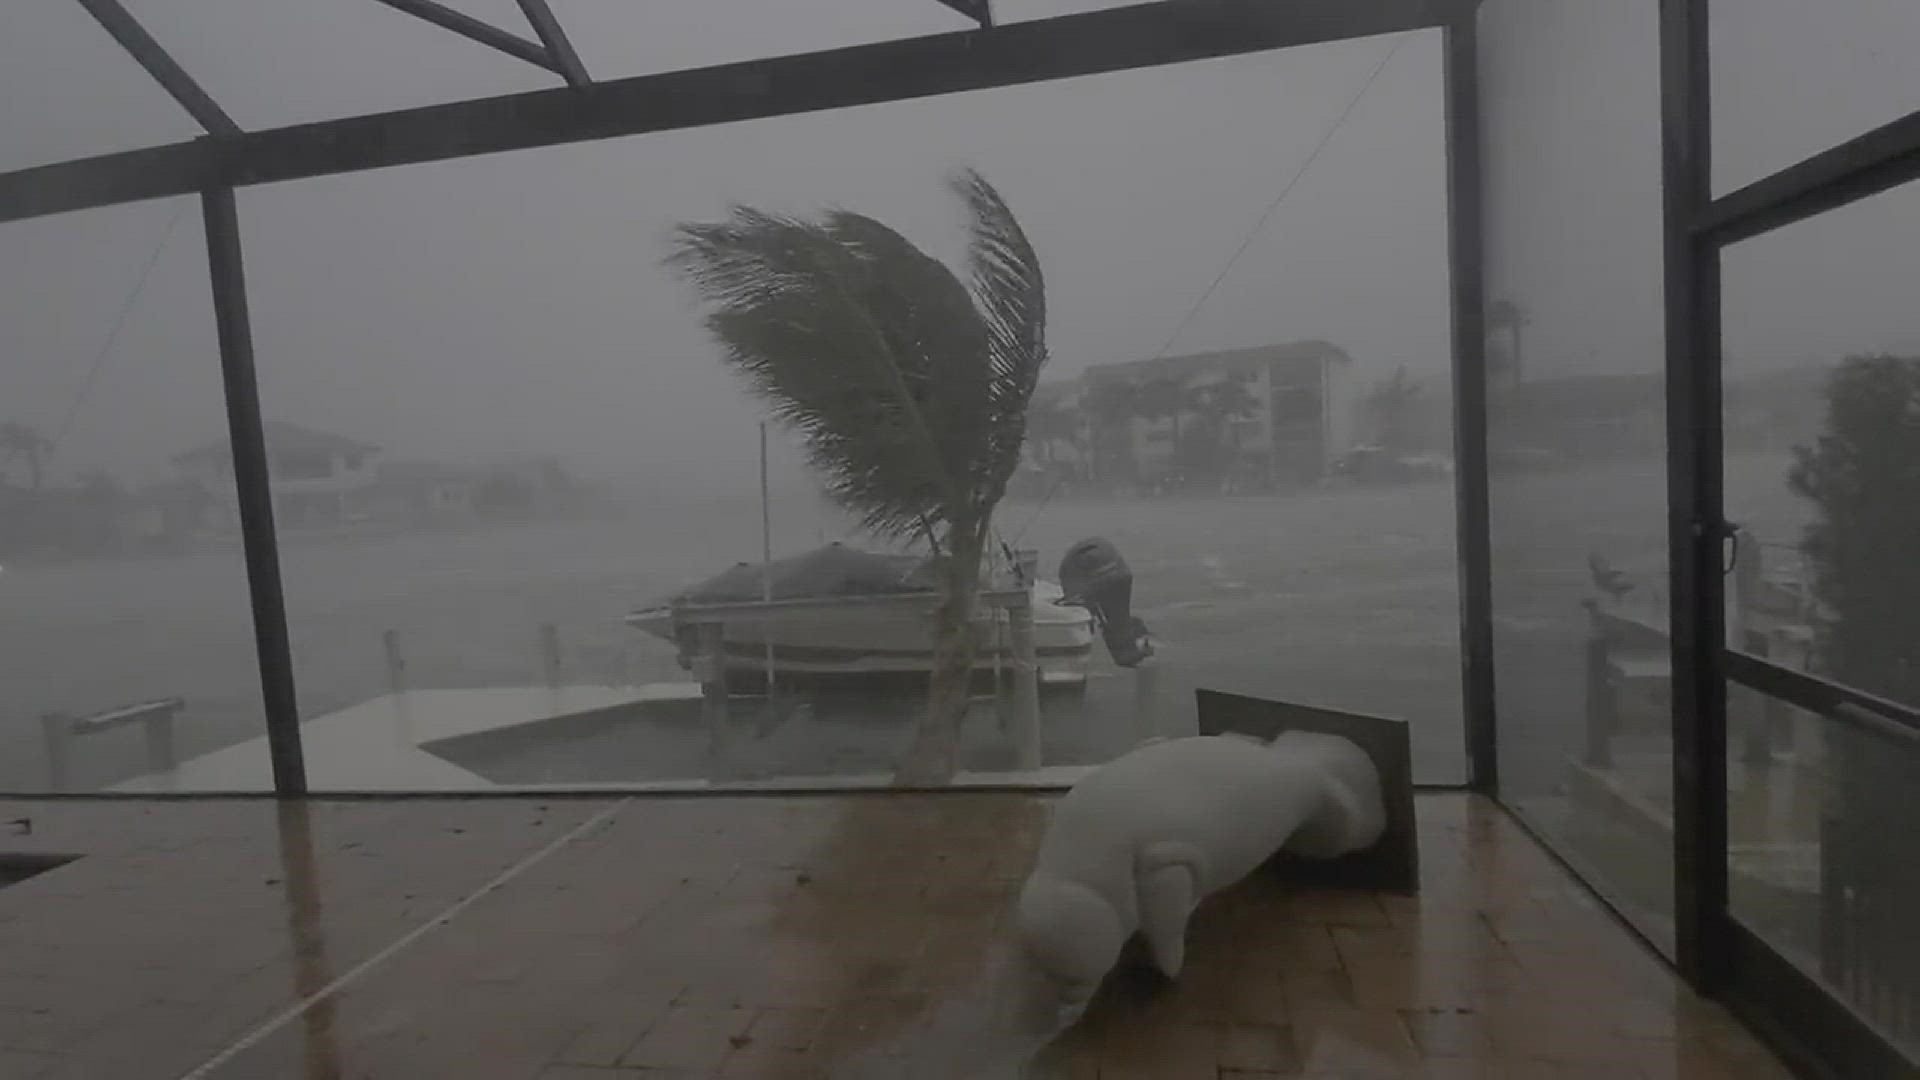 Video captured by Scott Schilke shows the powerful storm surge